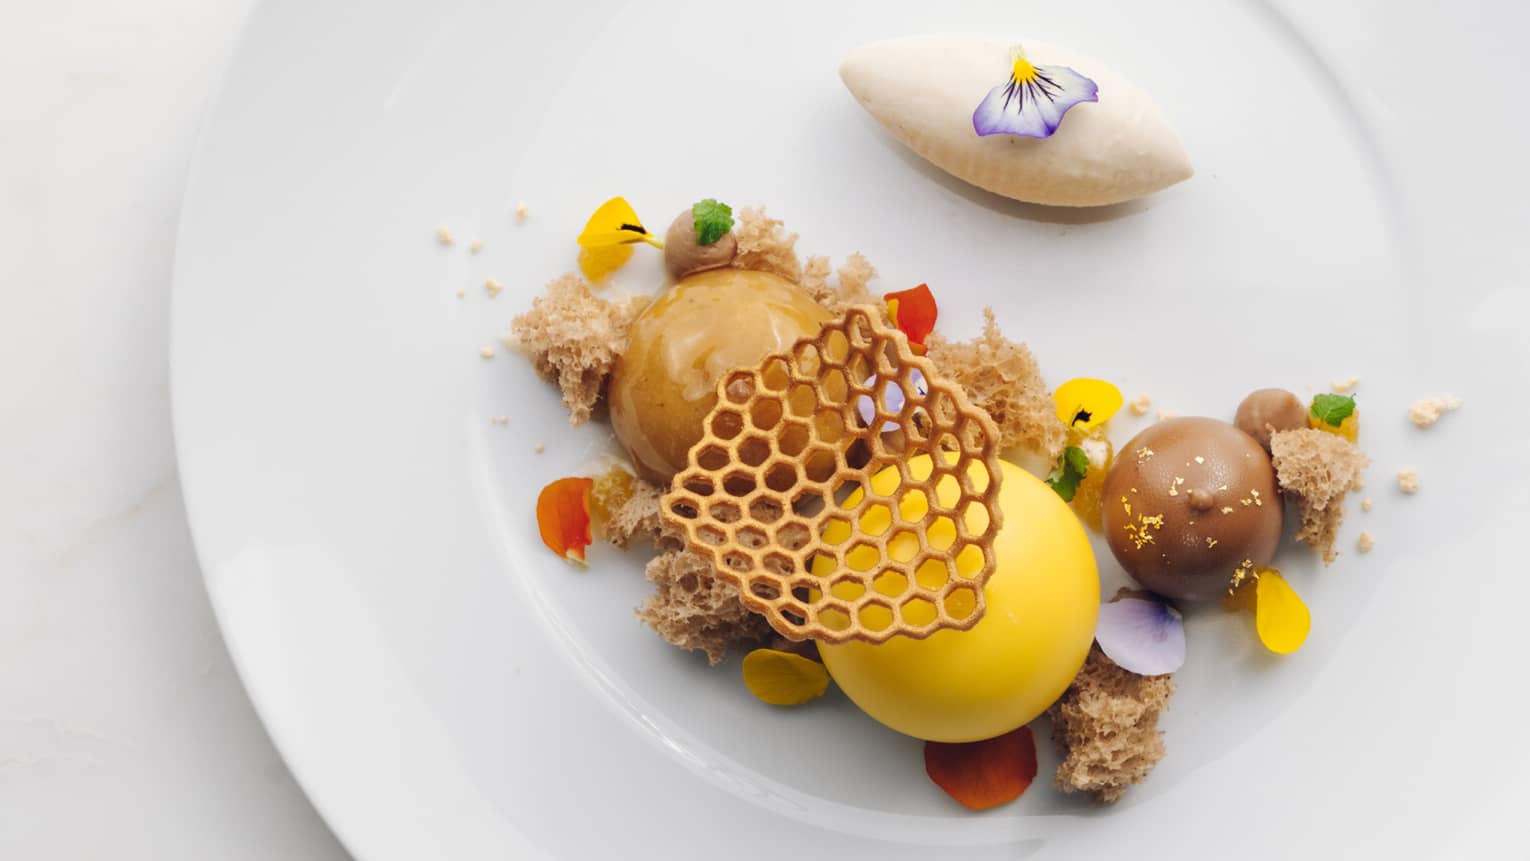 Wildflower Honey Cream with two spheres of brown ice cream and one of yellow ice cream, topped with honeycomb shape